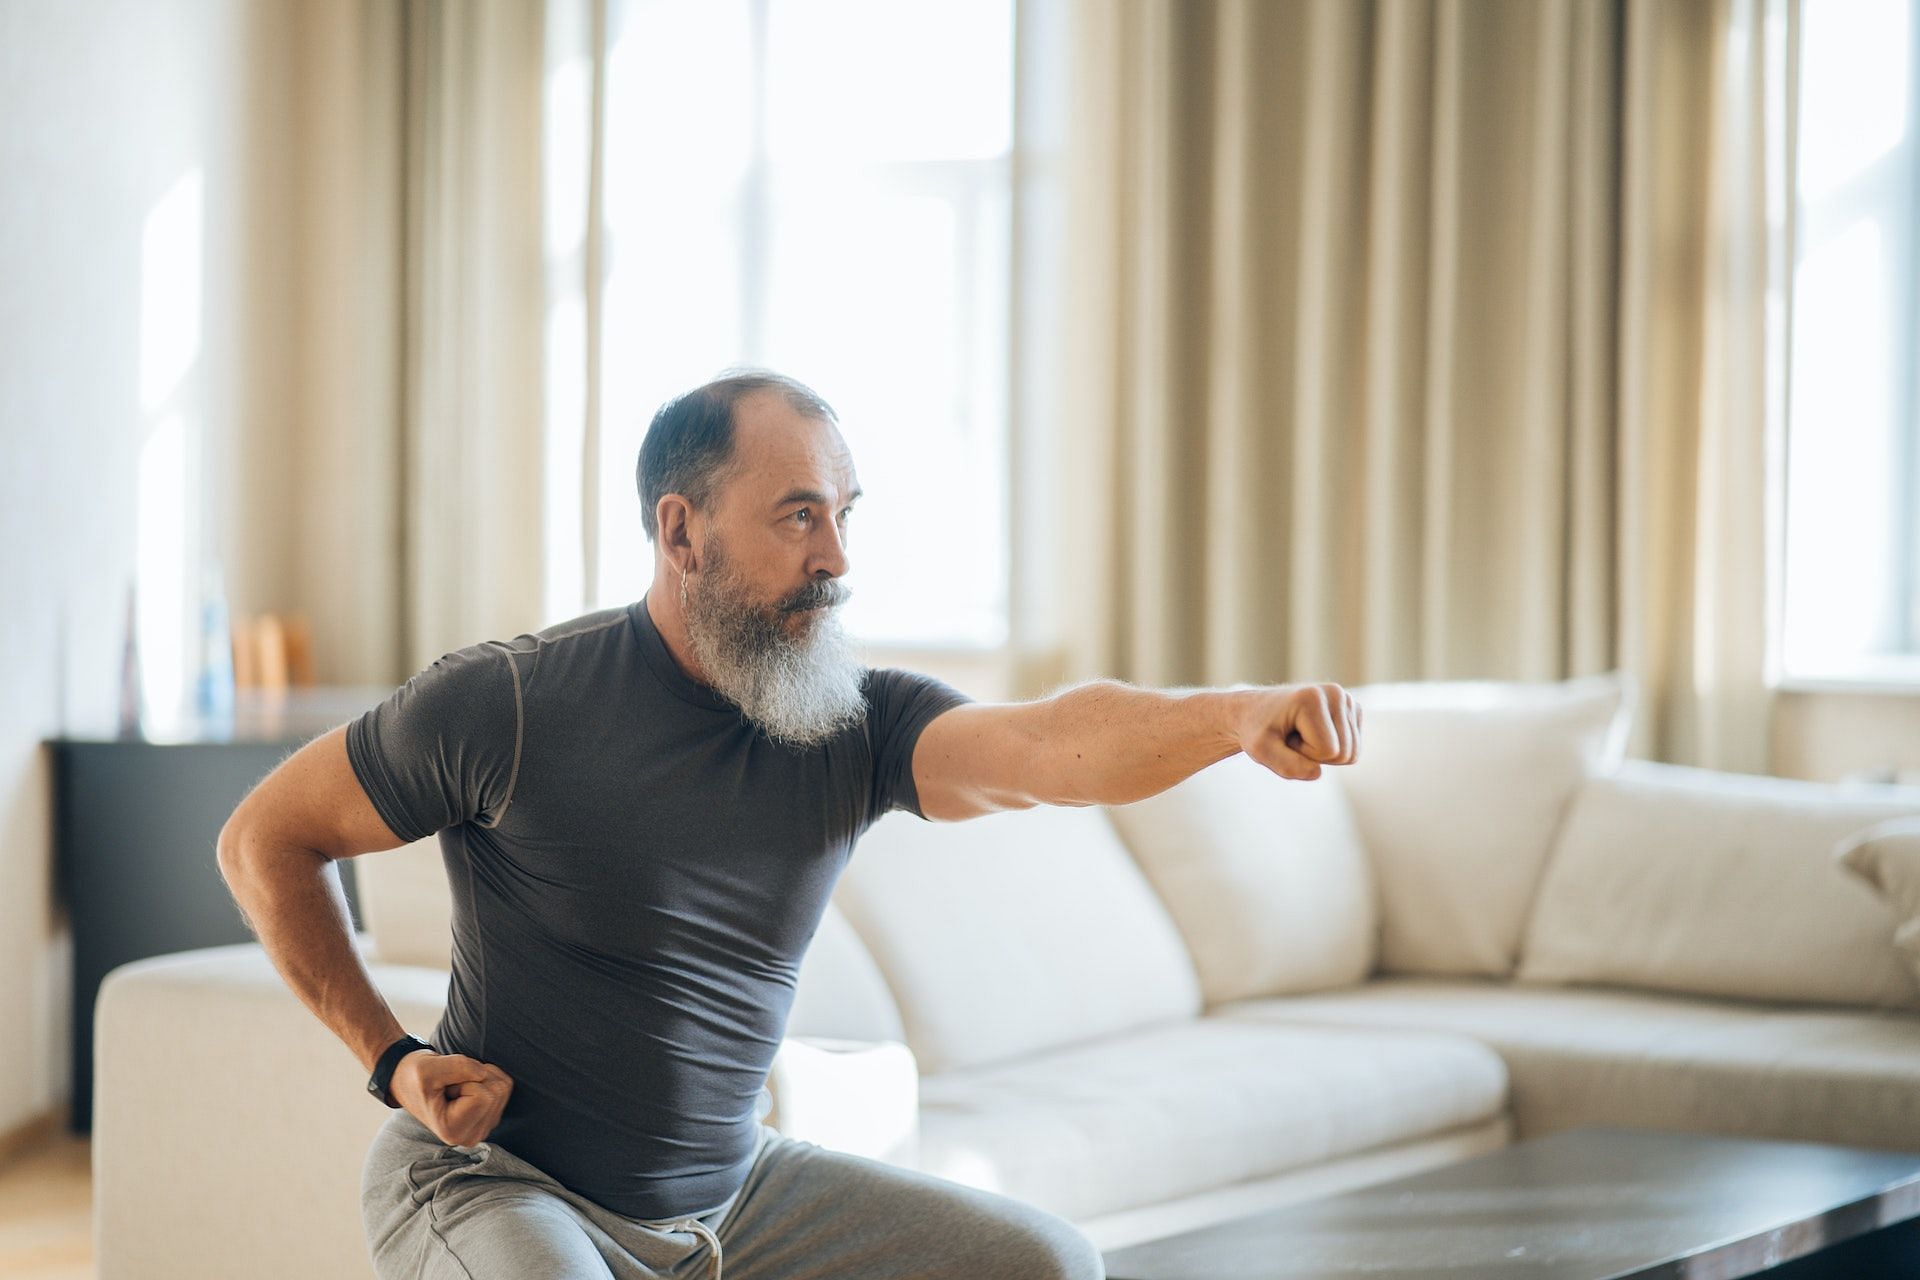 There are certain exercise habits that will help you slow down aging. (Photo via Pexels/Mikhail Nilov)